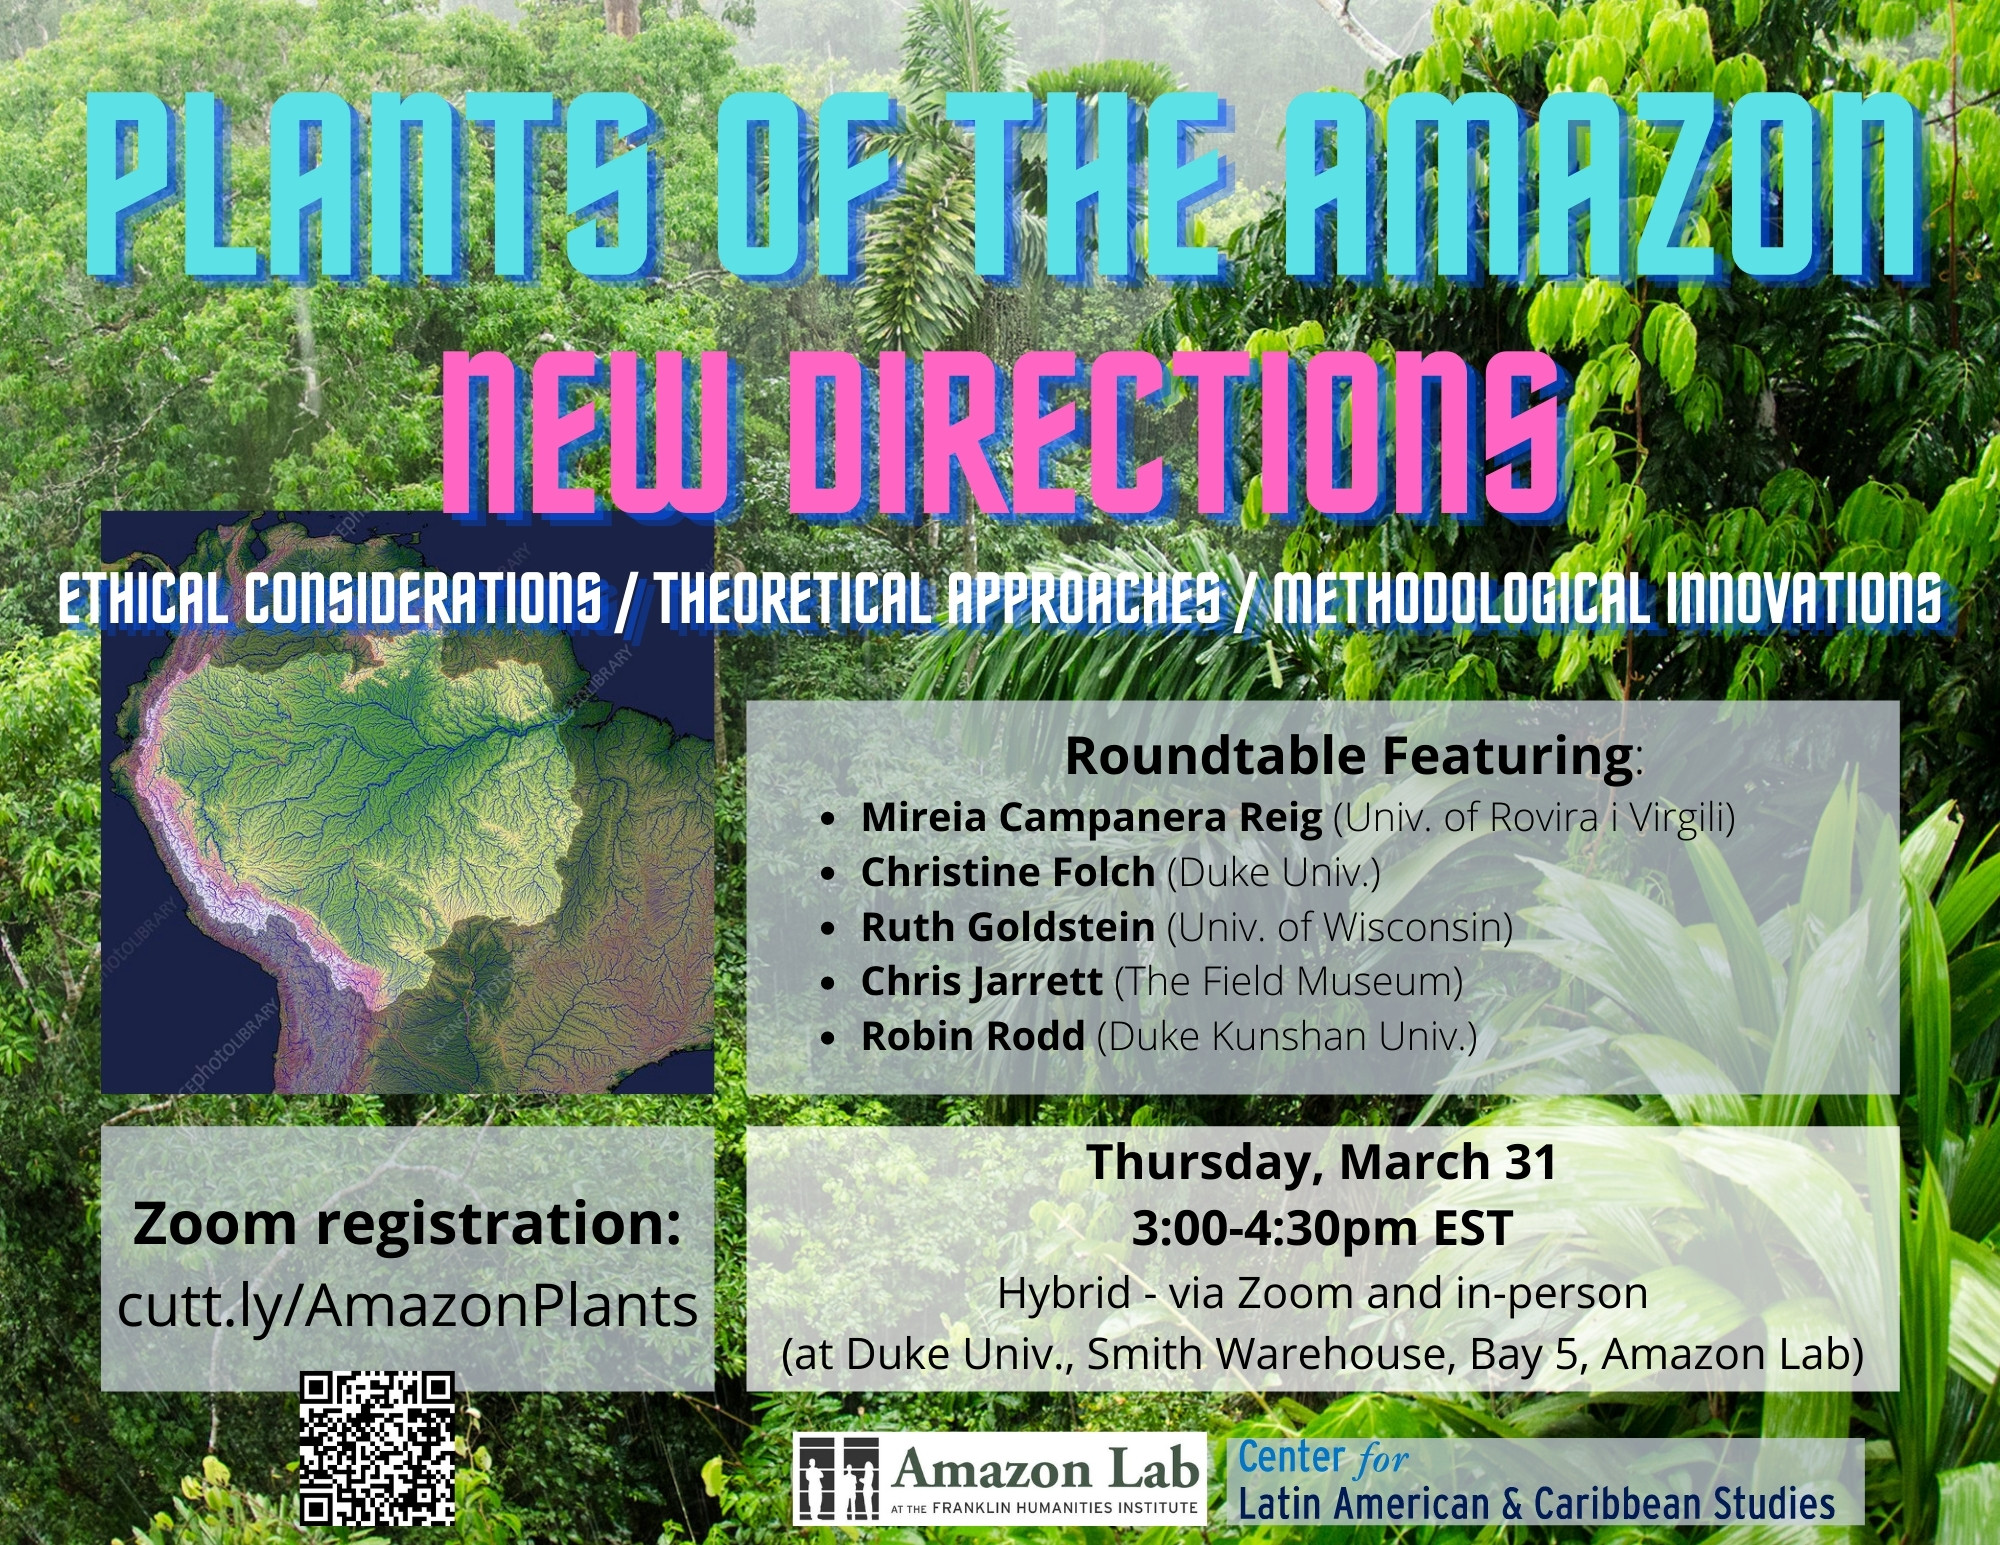 Image: background image of a jungle in the Amazon, foreground image of a topographic map of the Amazon region. Text: plants of the amazon new directions Ethical Considerations / Theoretical Approaches / Methodological Innovations ; Roundtable Featuring: Mireia Campanera Reig (Univ. of Rovira i Virgili) Christine Folch (Duke Univ.) Ruth Goldstein (Univ. of Wisconsin) Chris Jarrett (The Field Museum); Robin Rodd (Duke Kunshan); Thursday, March 31 3:00-4:30pm EST Hybrid - via Zoom and in-person (at Duke Univ., Smith Warehouse, Bay 5, Amazon Lab); Zoom registration: cutt.ly/AmazonPlants